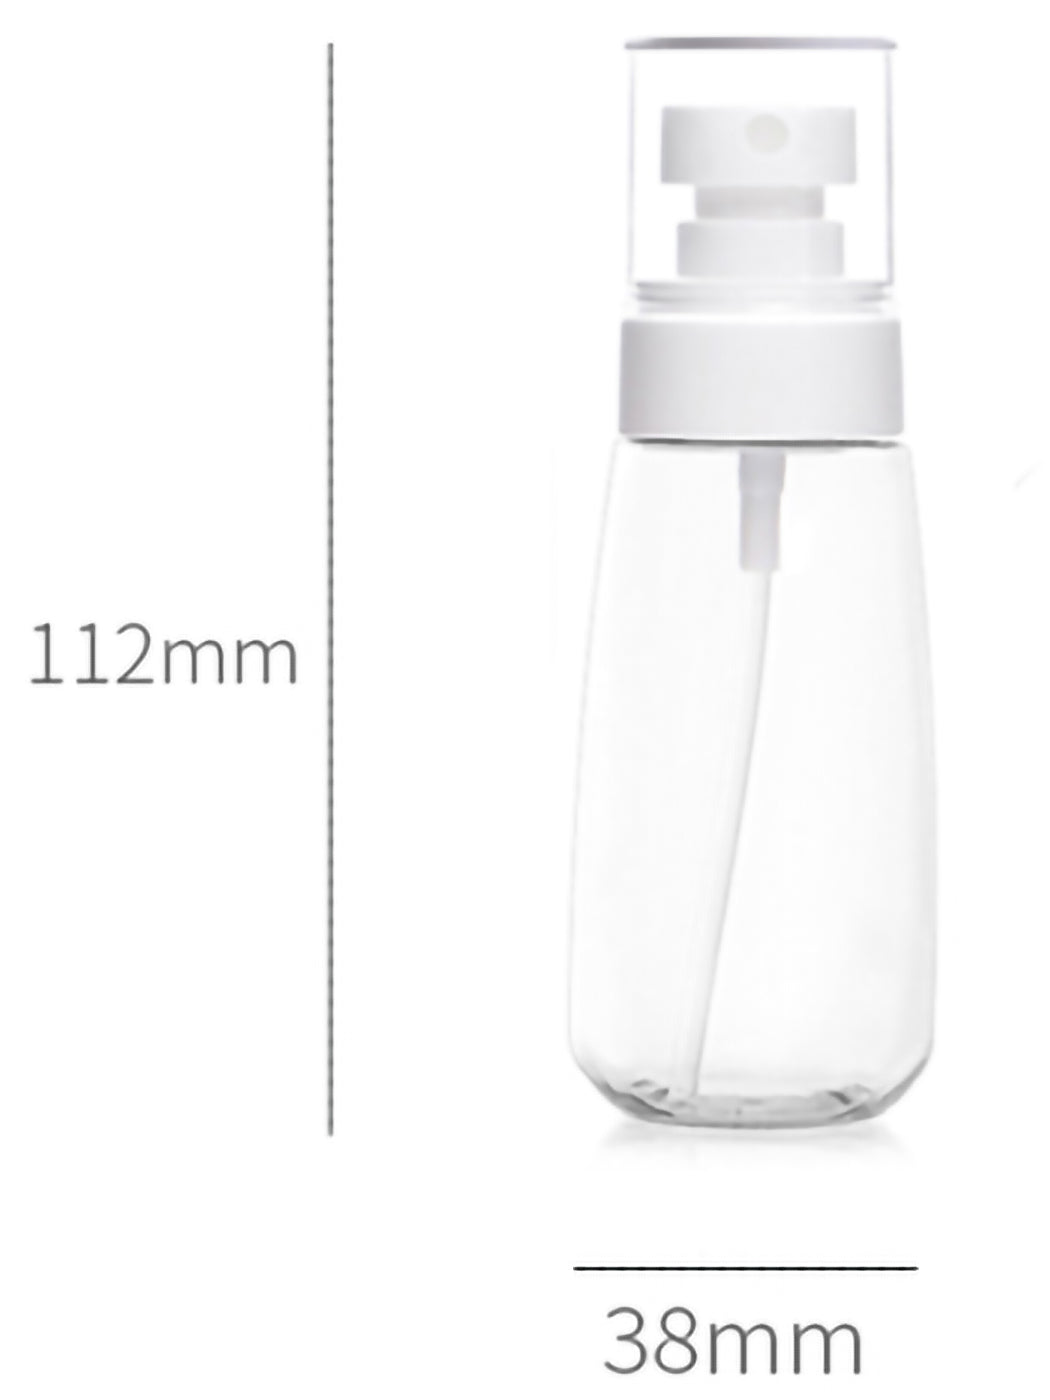 Plastic Clear Spray Bottle Refillable Container for Essential Oils